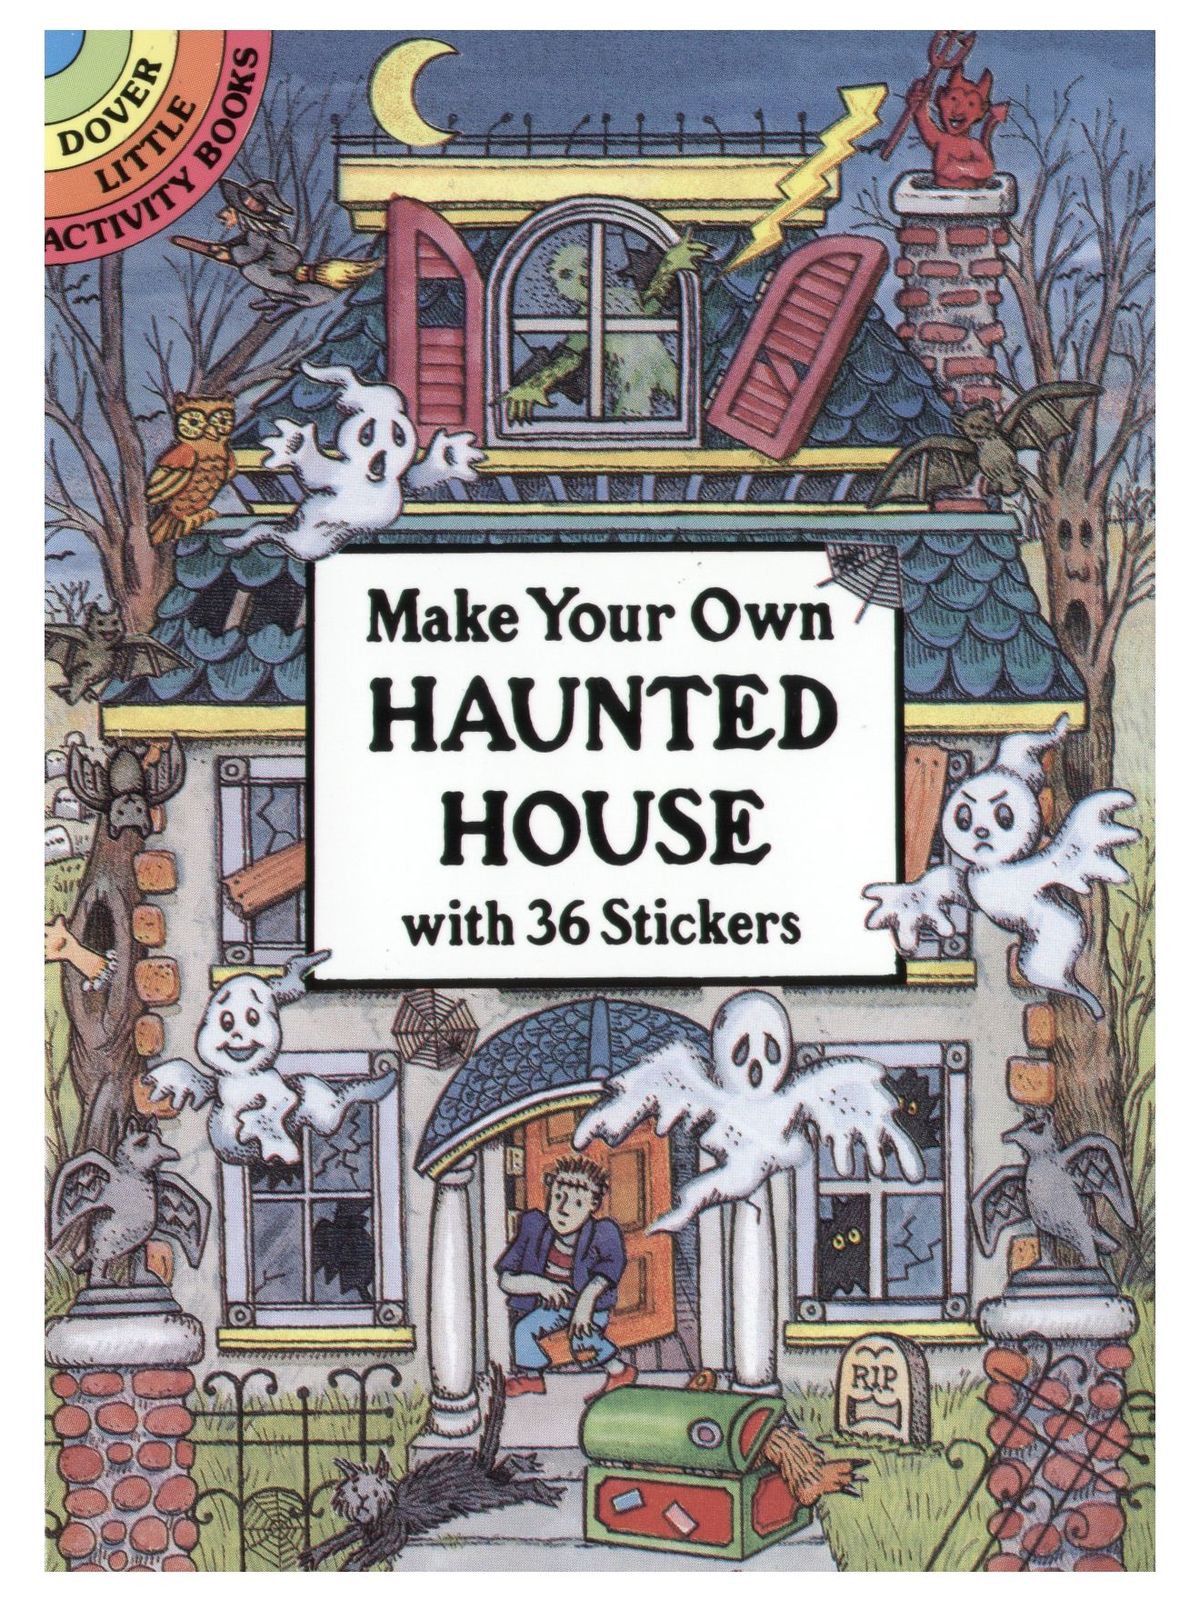 Dover - Make Your Own Haunted House With 36 Stickers - Make Your Own Haunted House With 36 Stickers